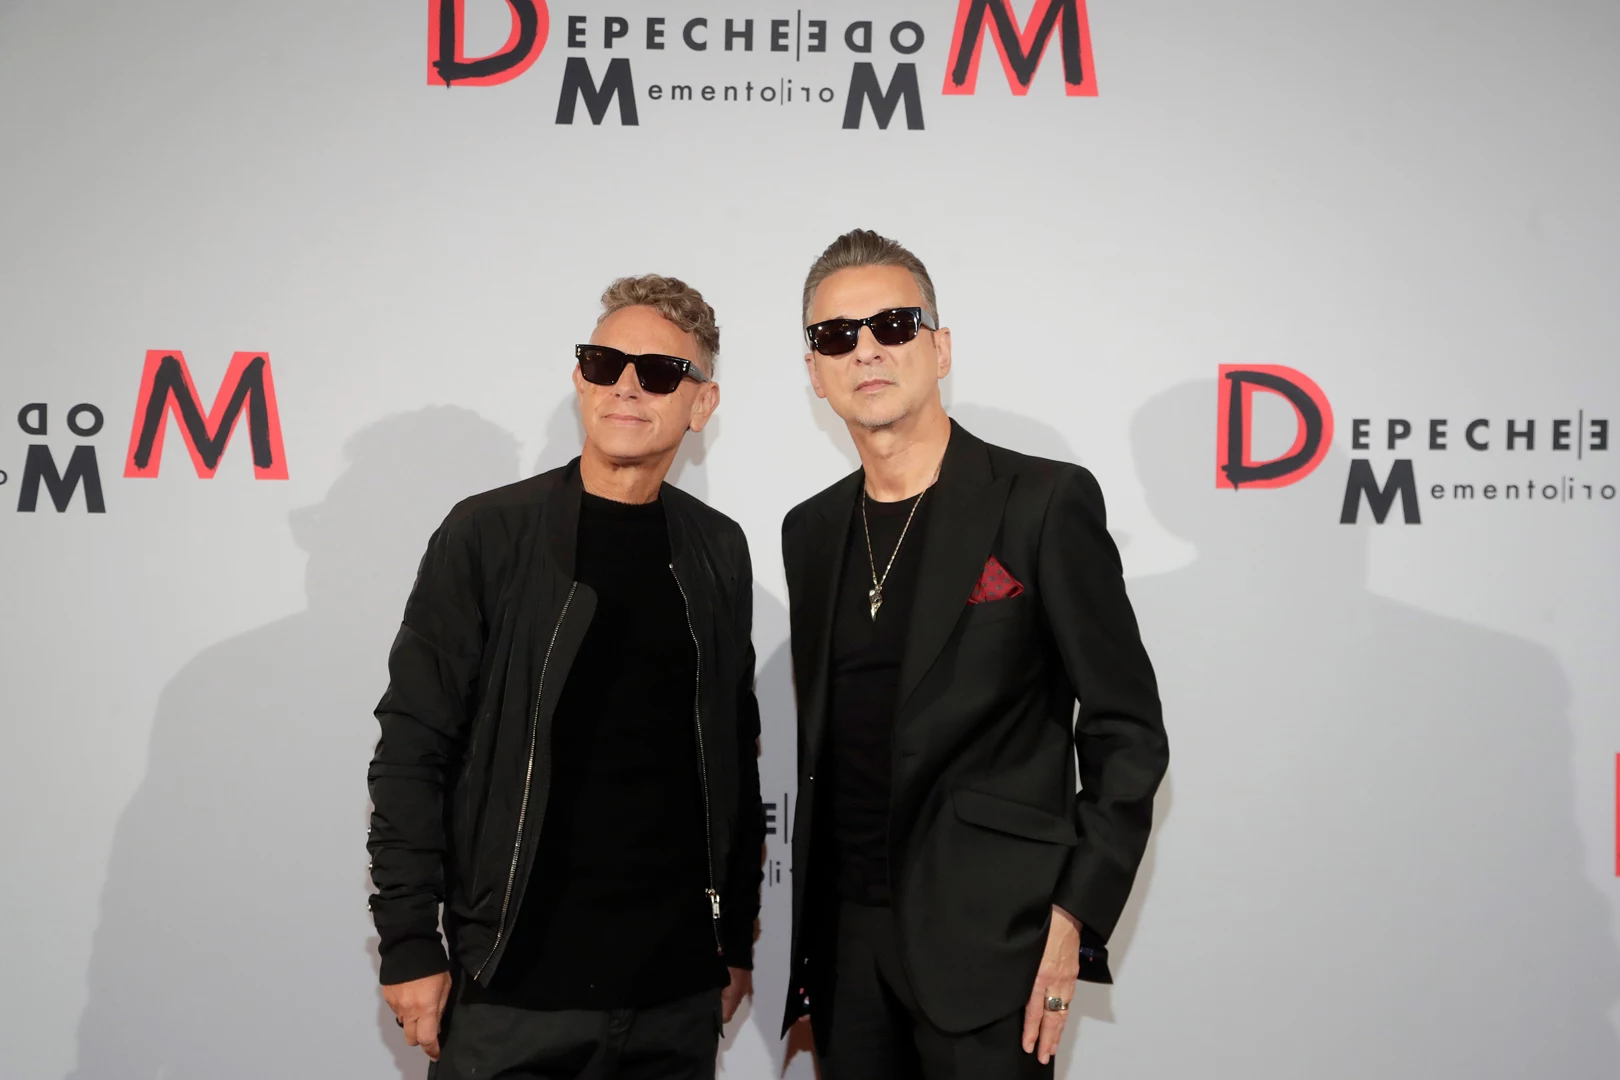 Depeche Mode to tour in 2023, Page 2